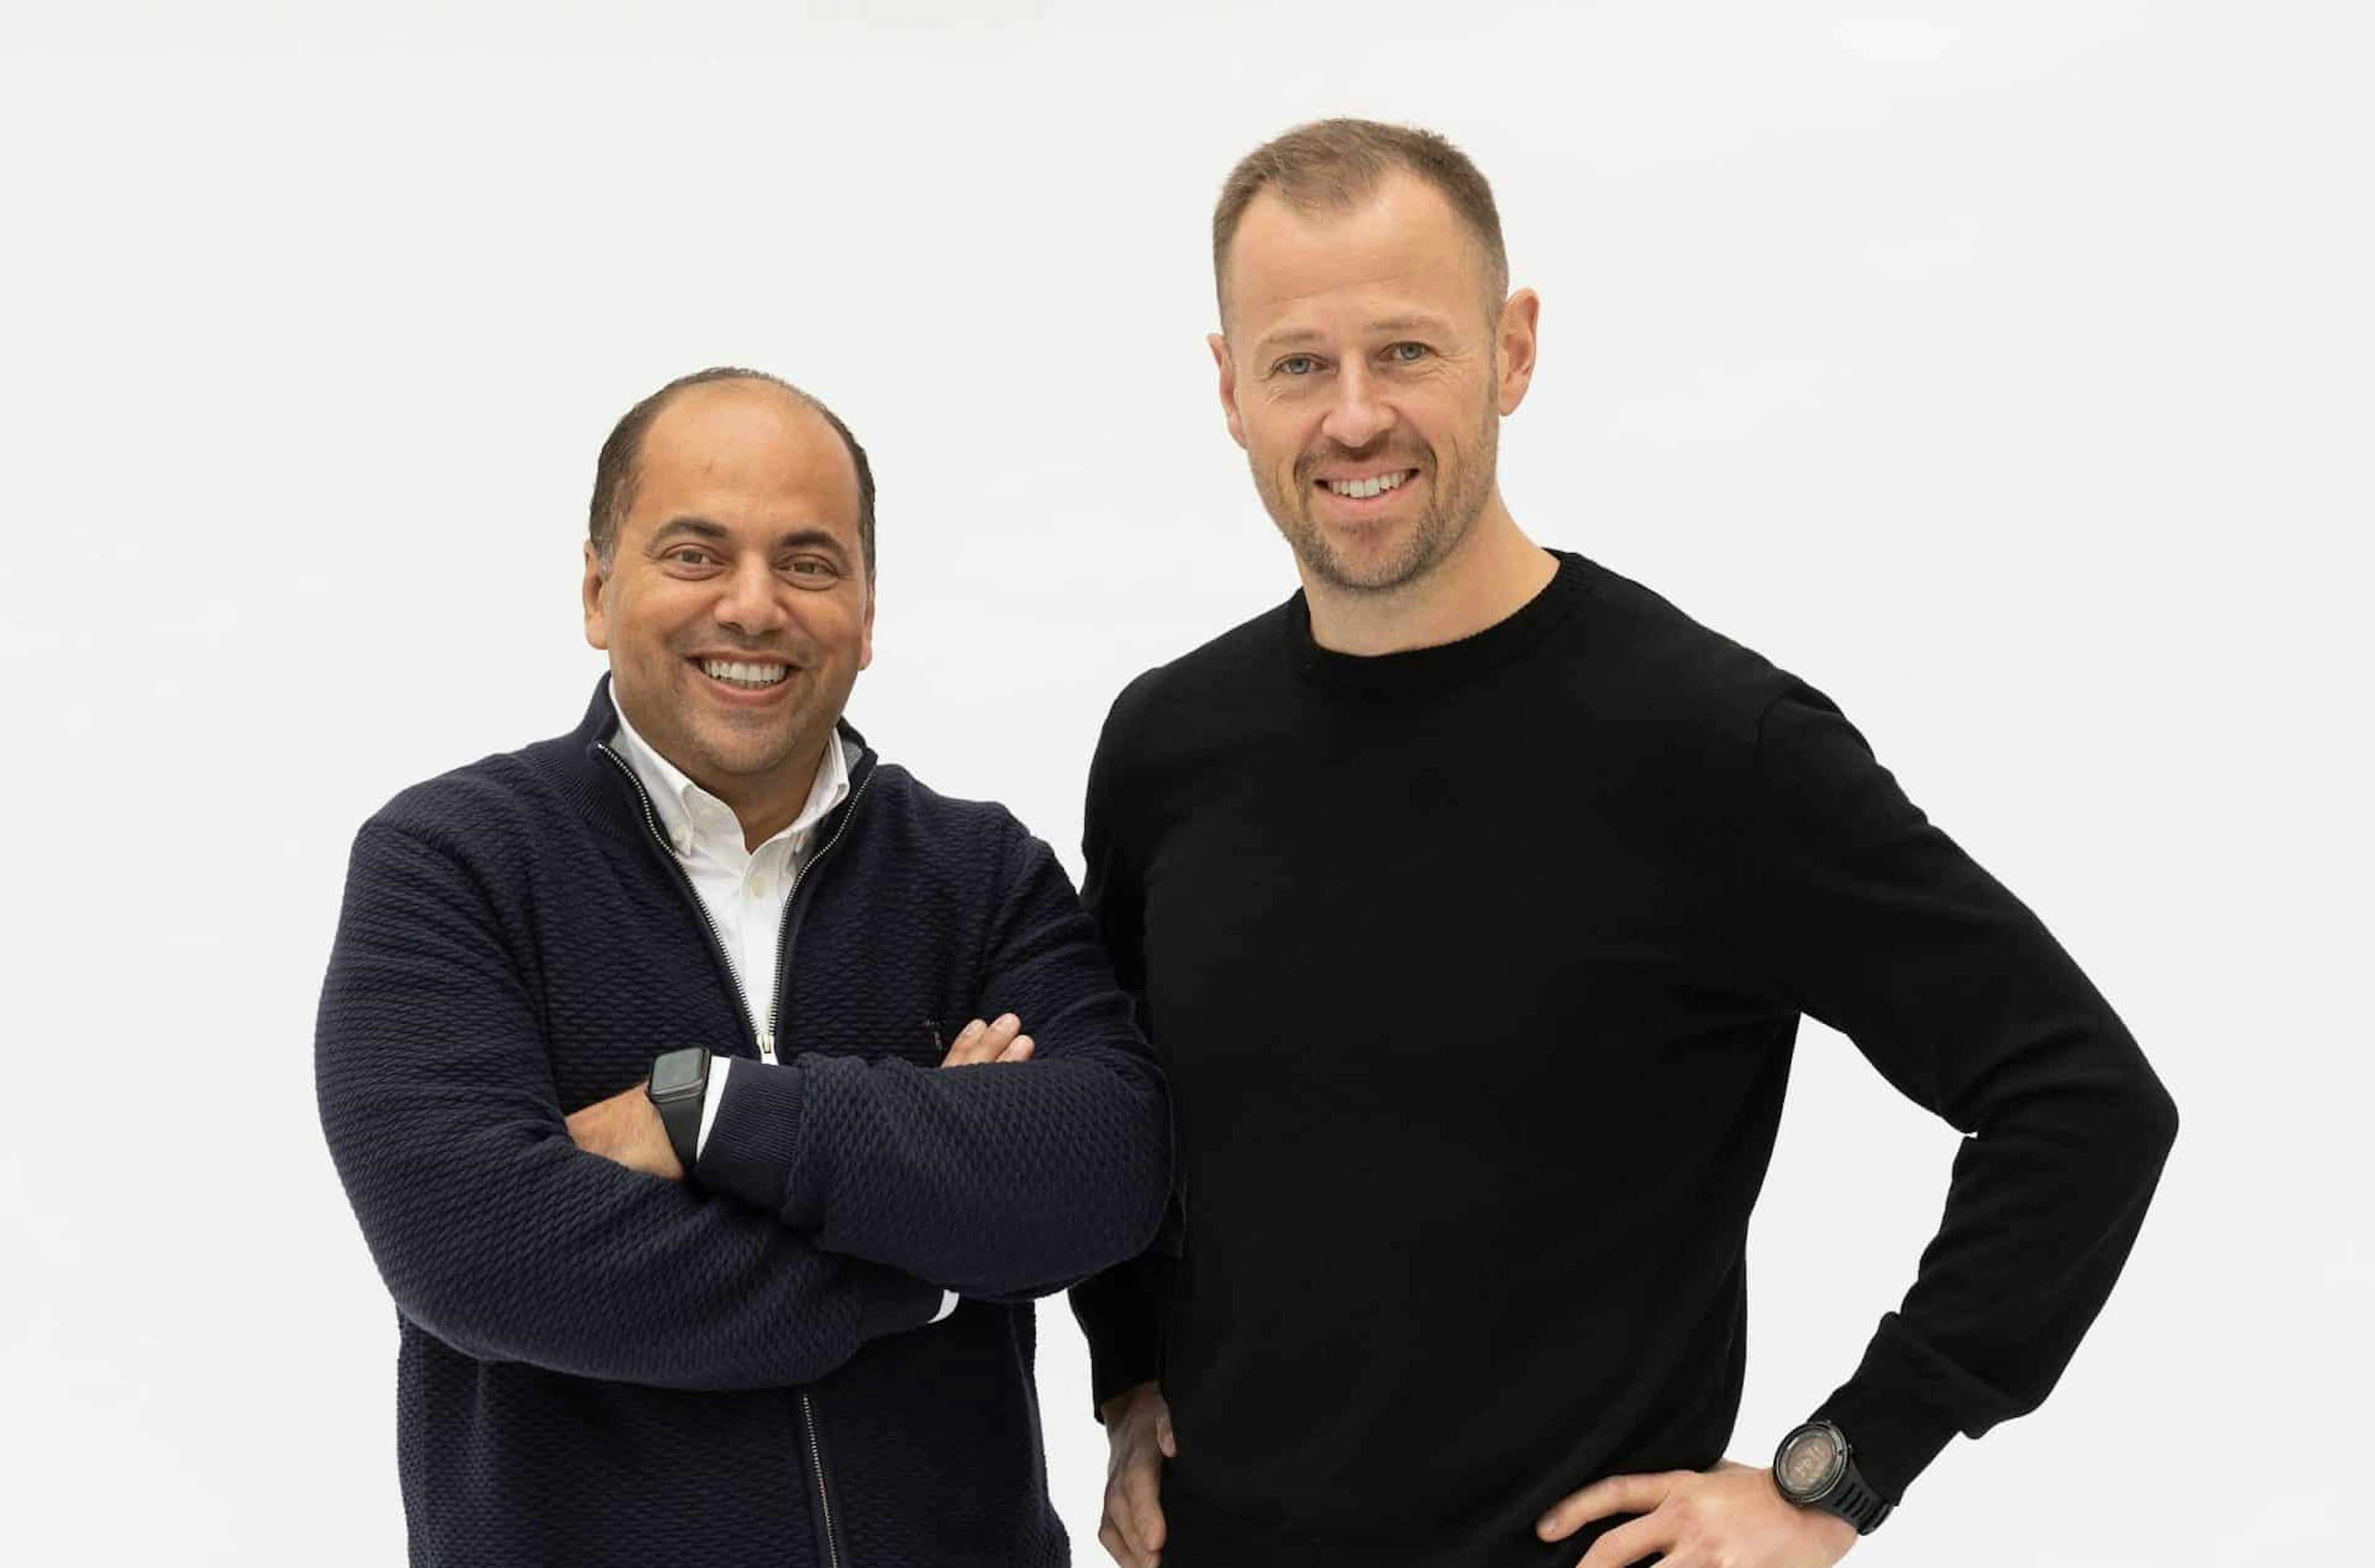 Peter Beckman and Sameh El Ansary, founders of Treyd